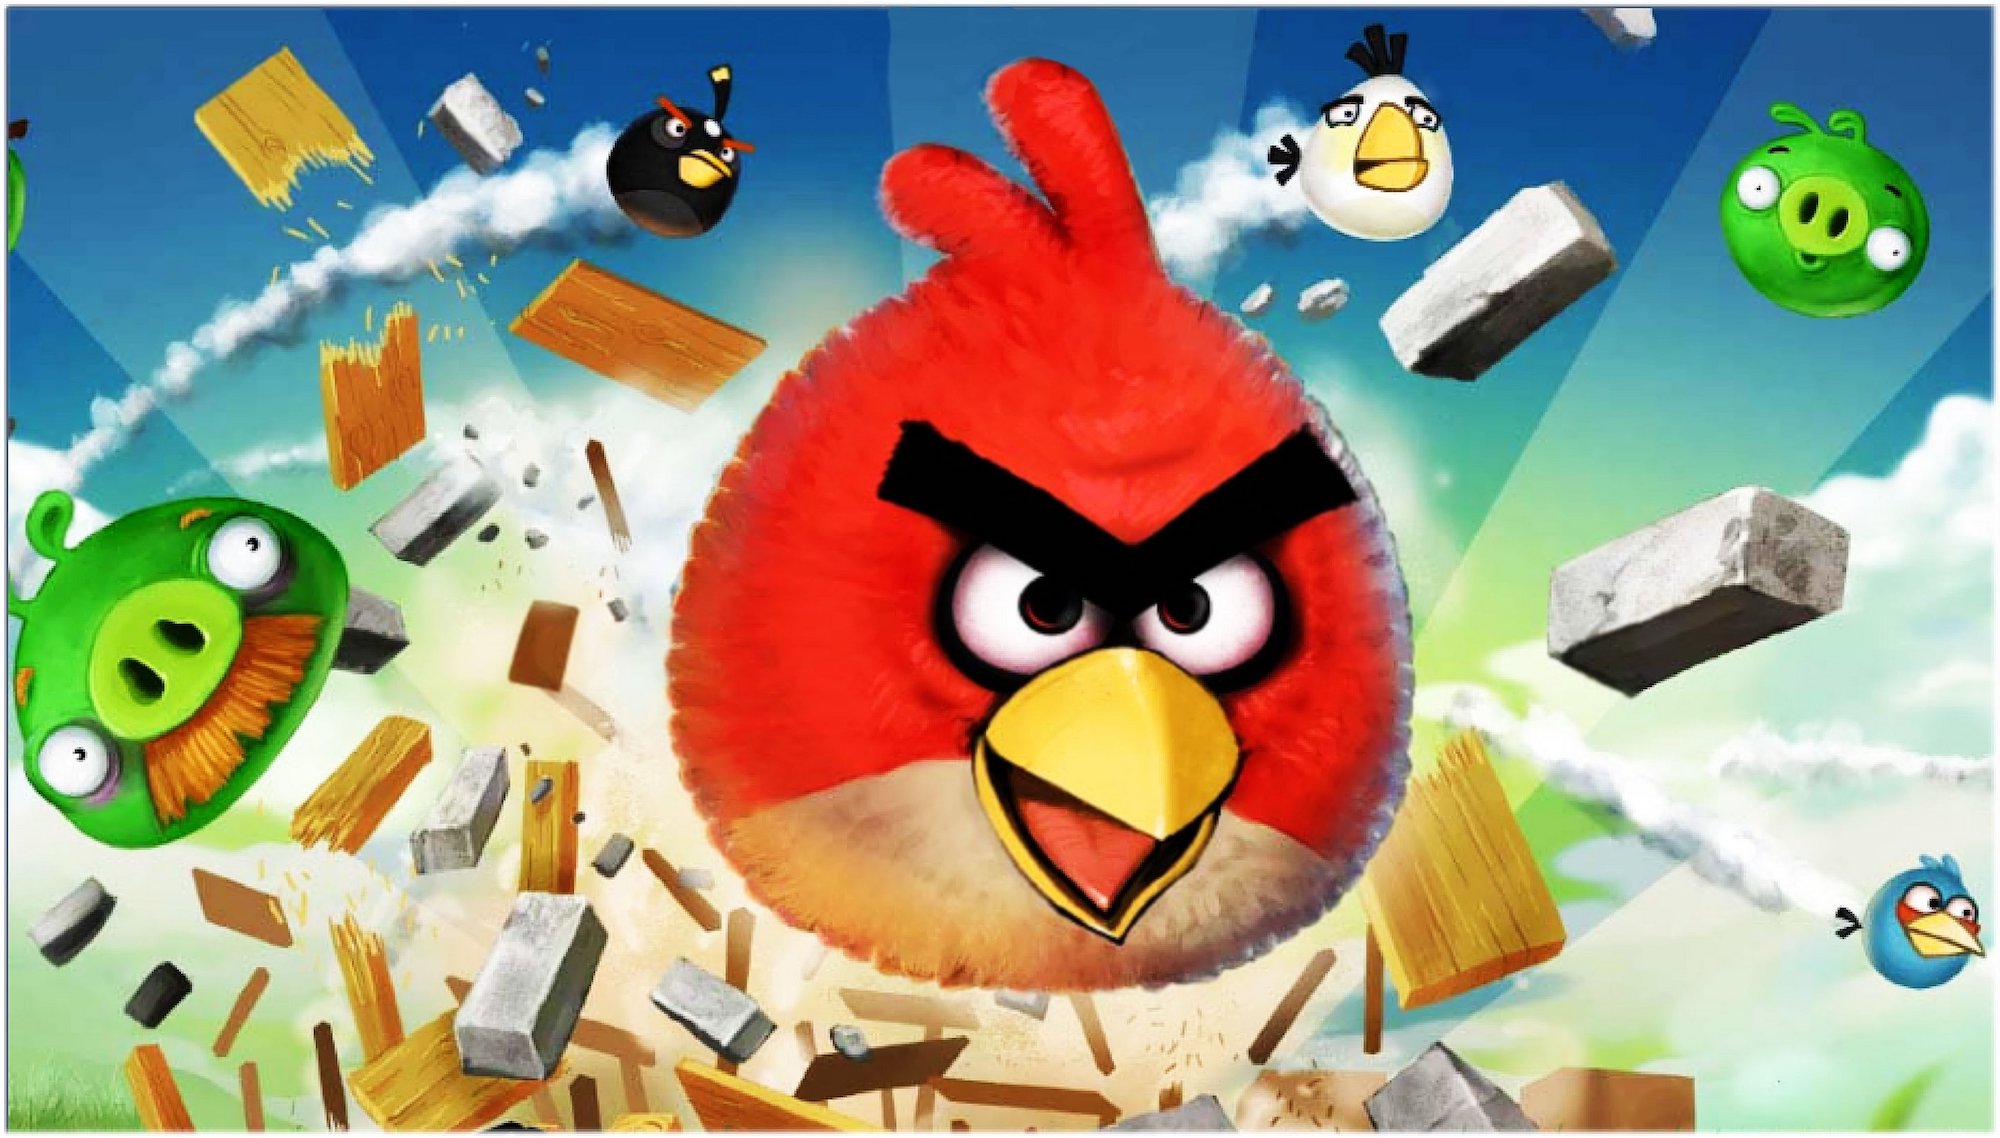 Angry Birds game loading screen Â© Stock Experiment / Alamy Stock